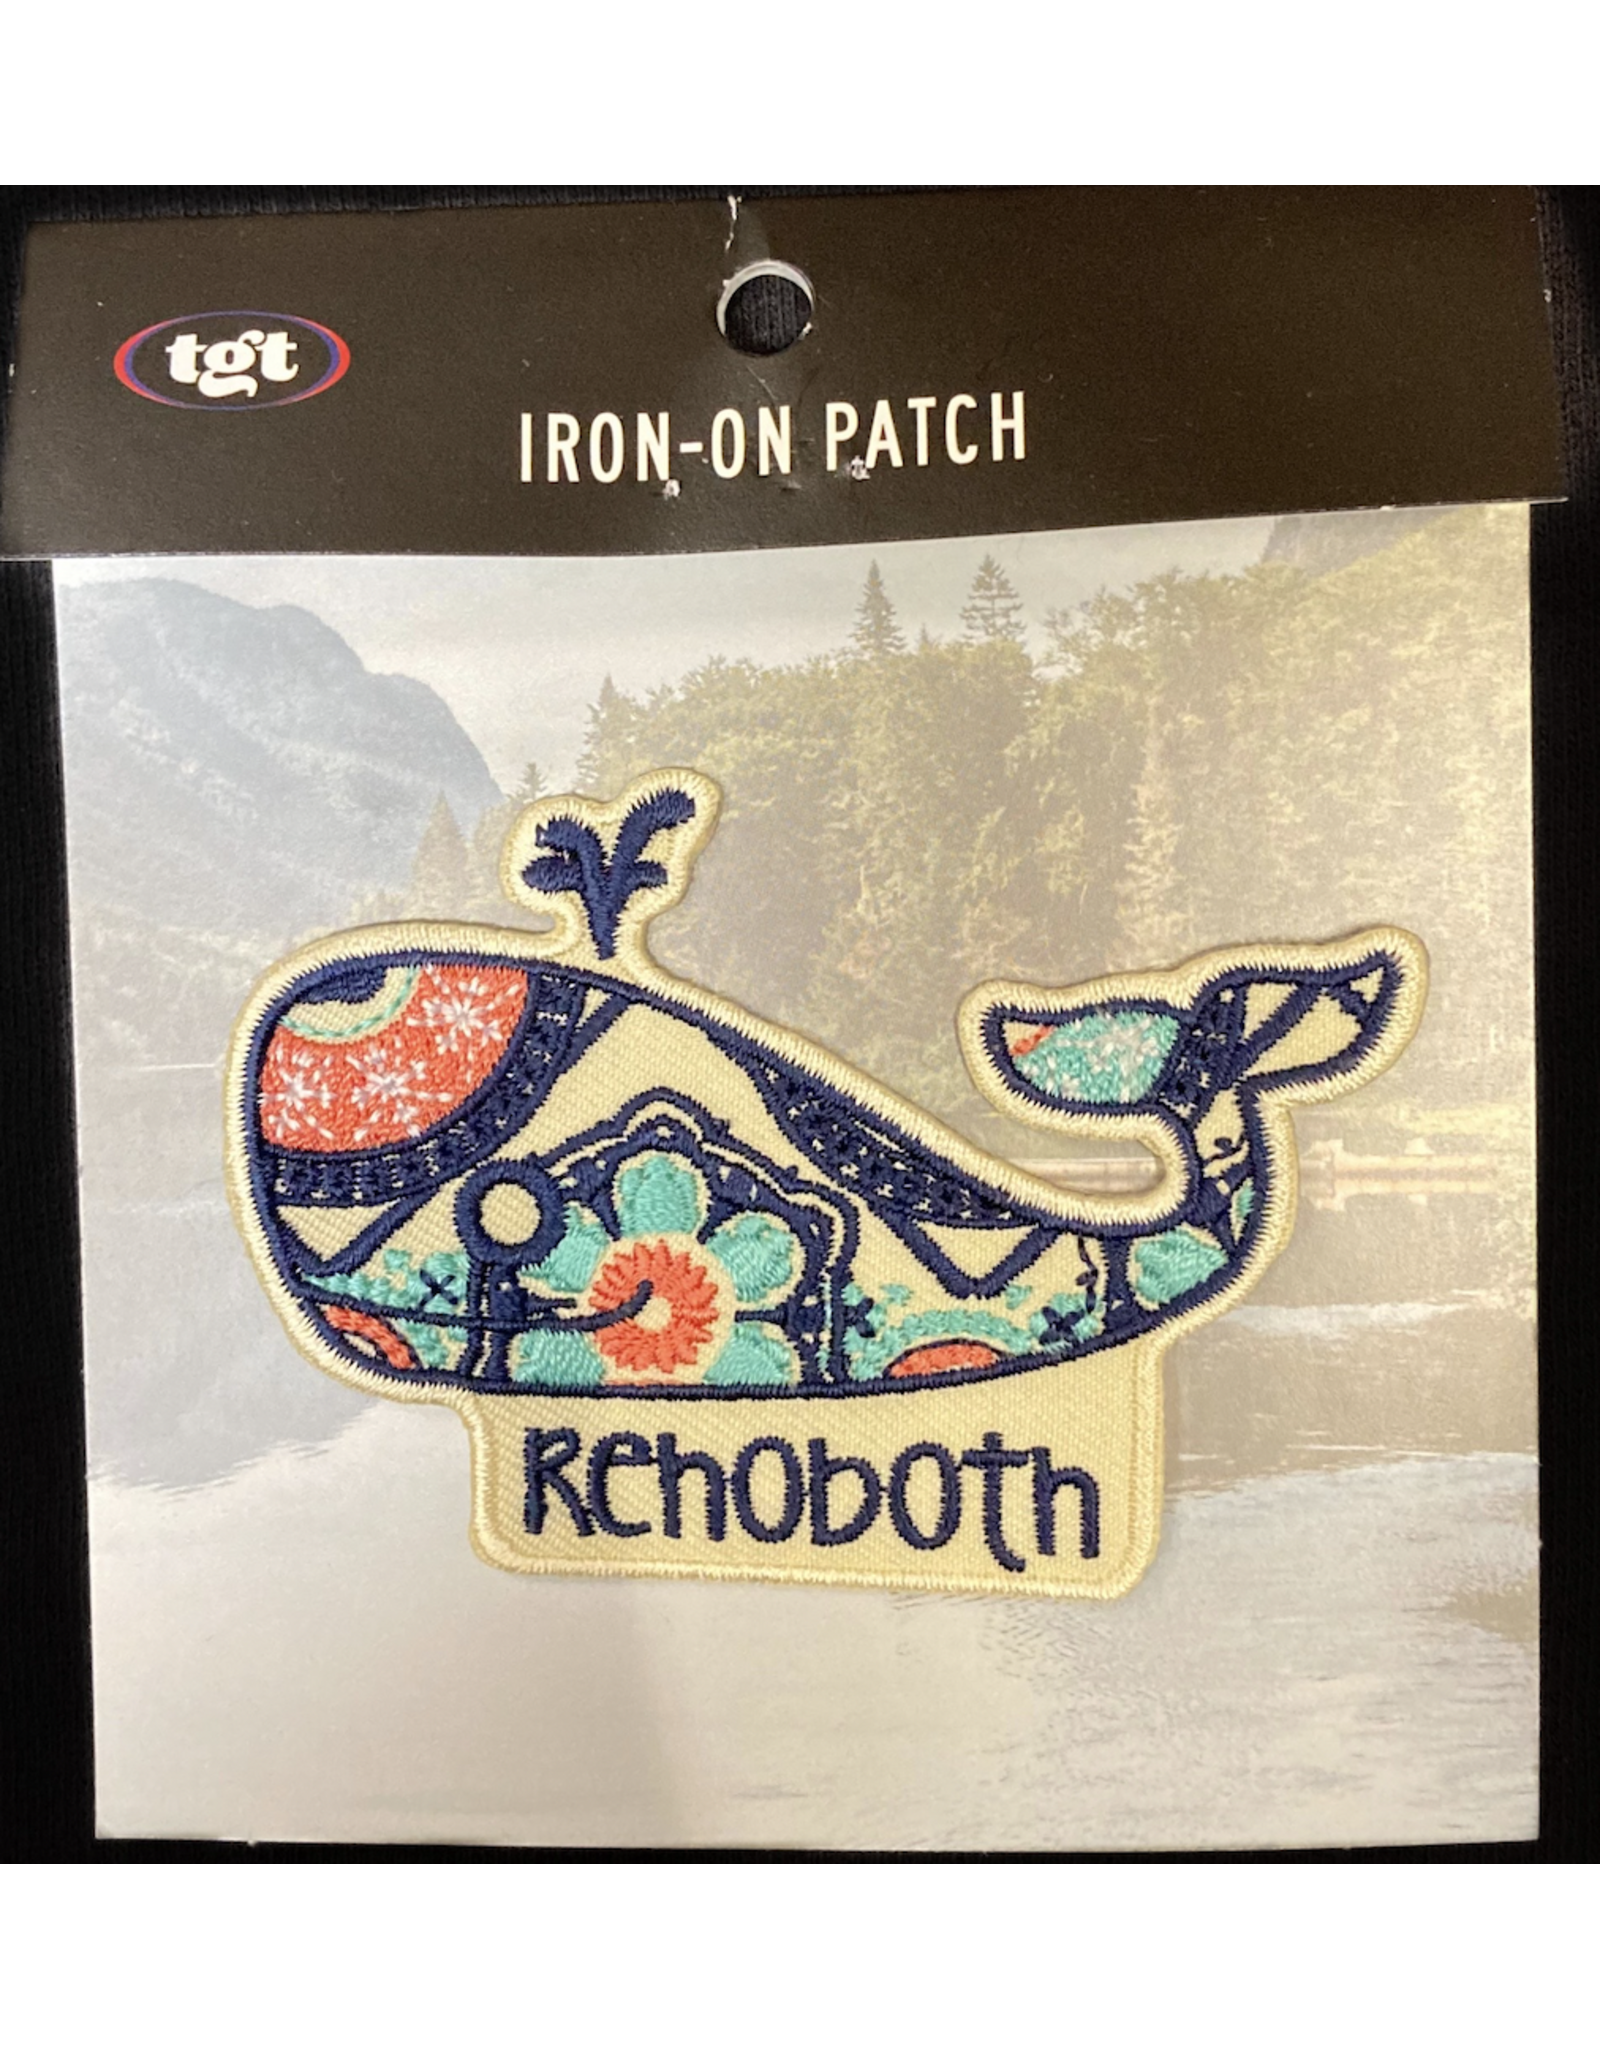 BLUE 84 IRON ON PATCH WISH LIST WHALE